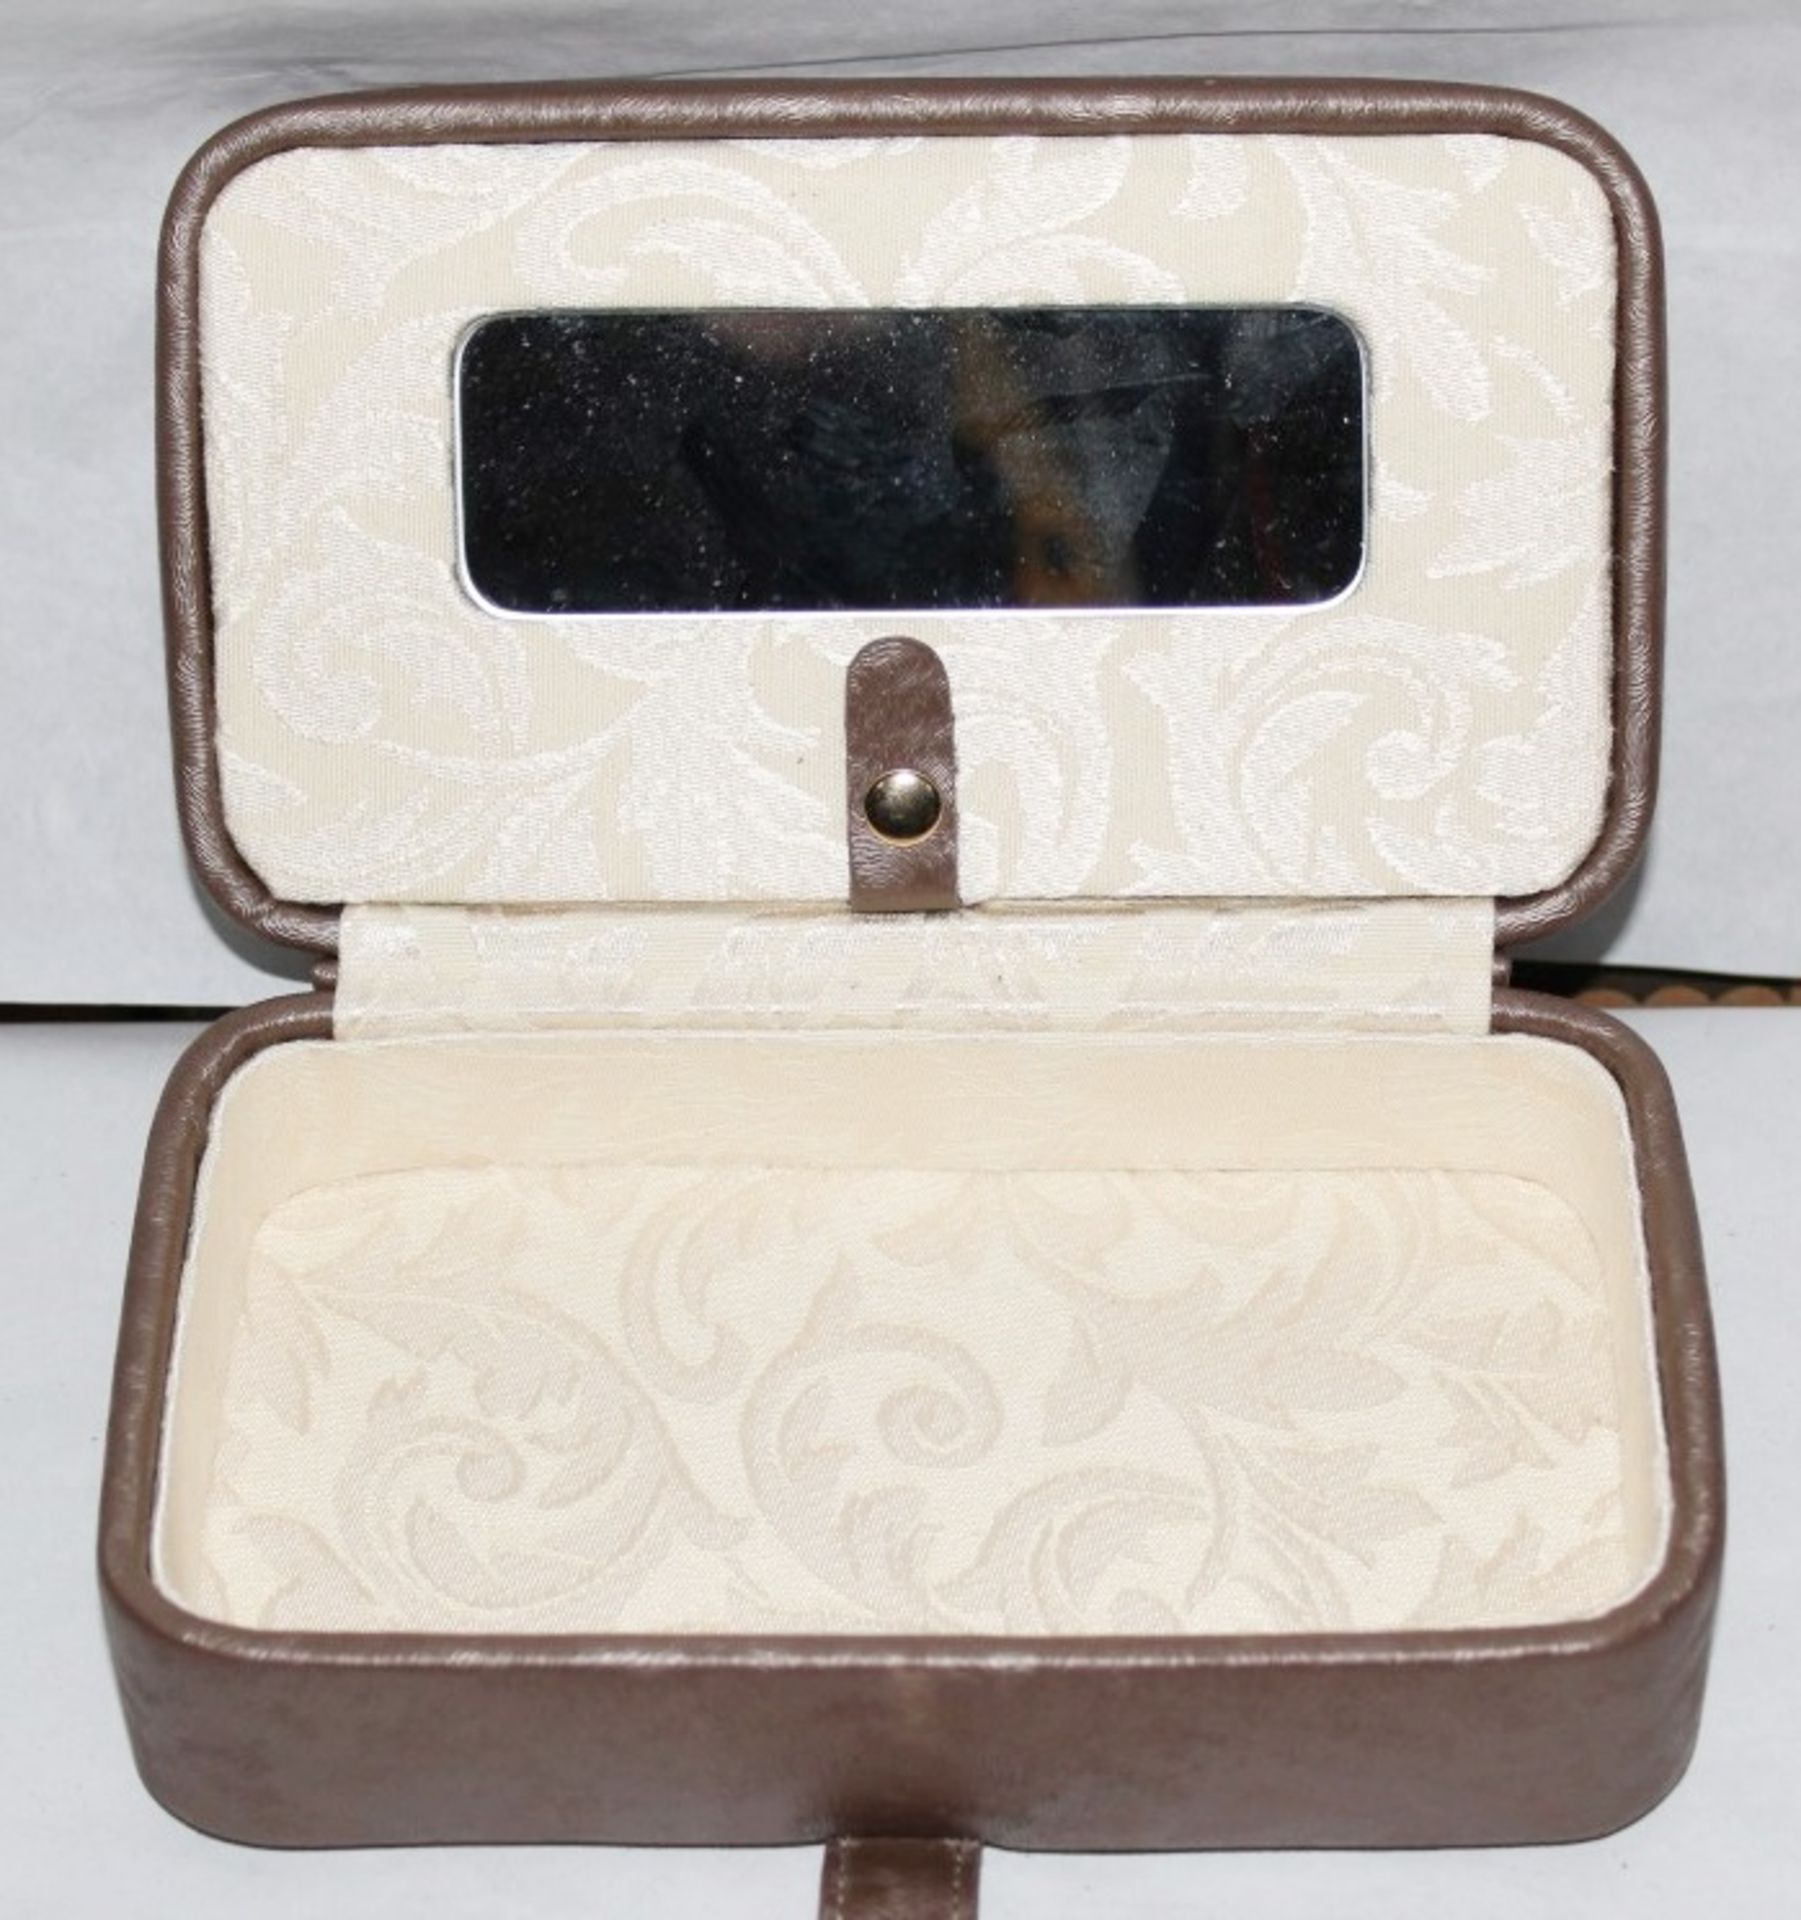 1 x "AB Collezioni" Italian Luxury Jewellery Box With Mirror (33545) - Ref L153 – Ideal For Travel - - Image 3 of 3